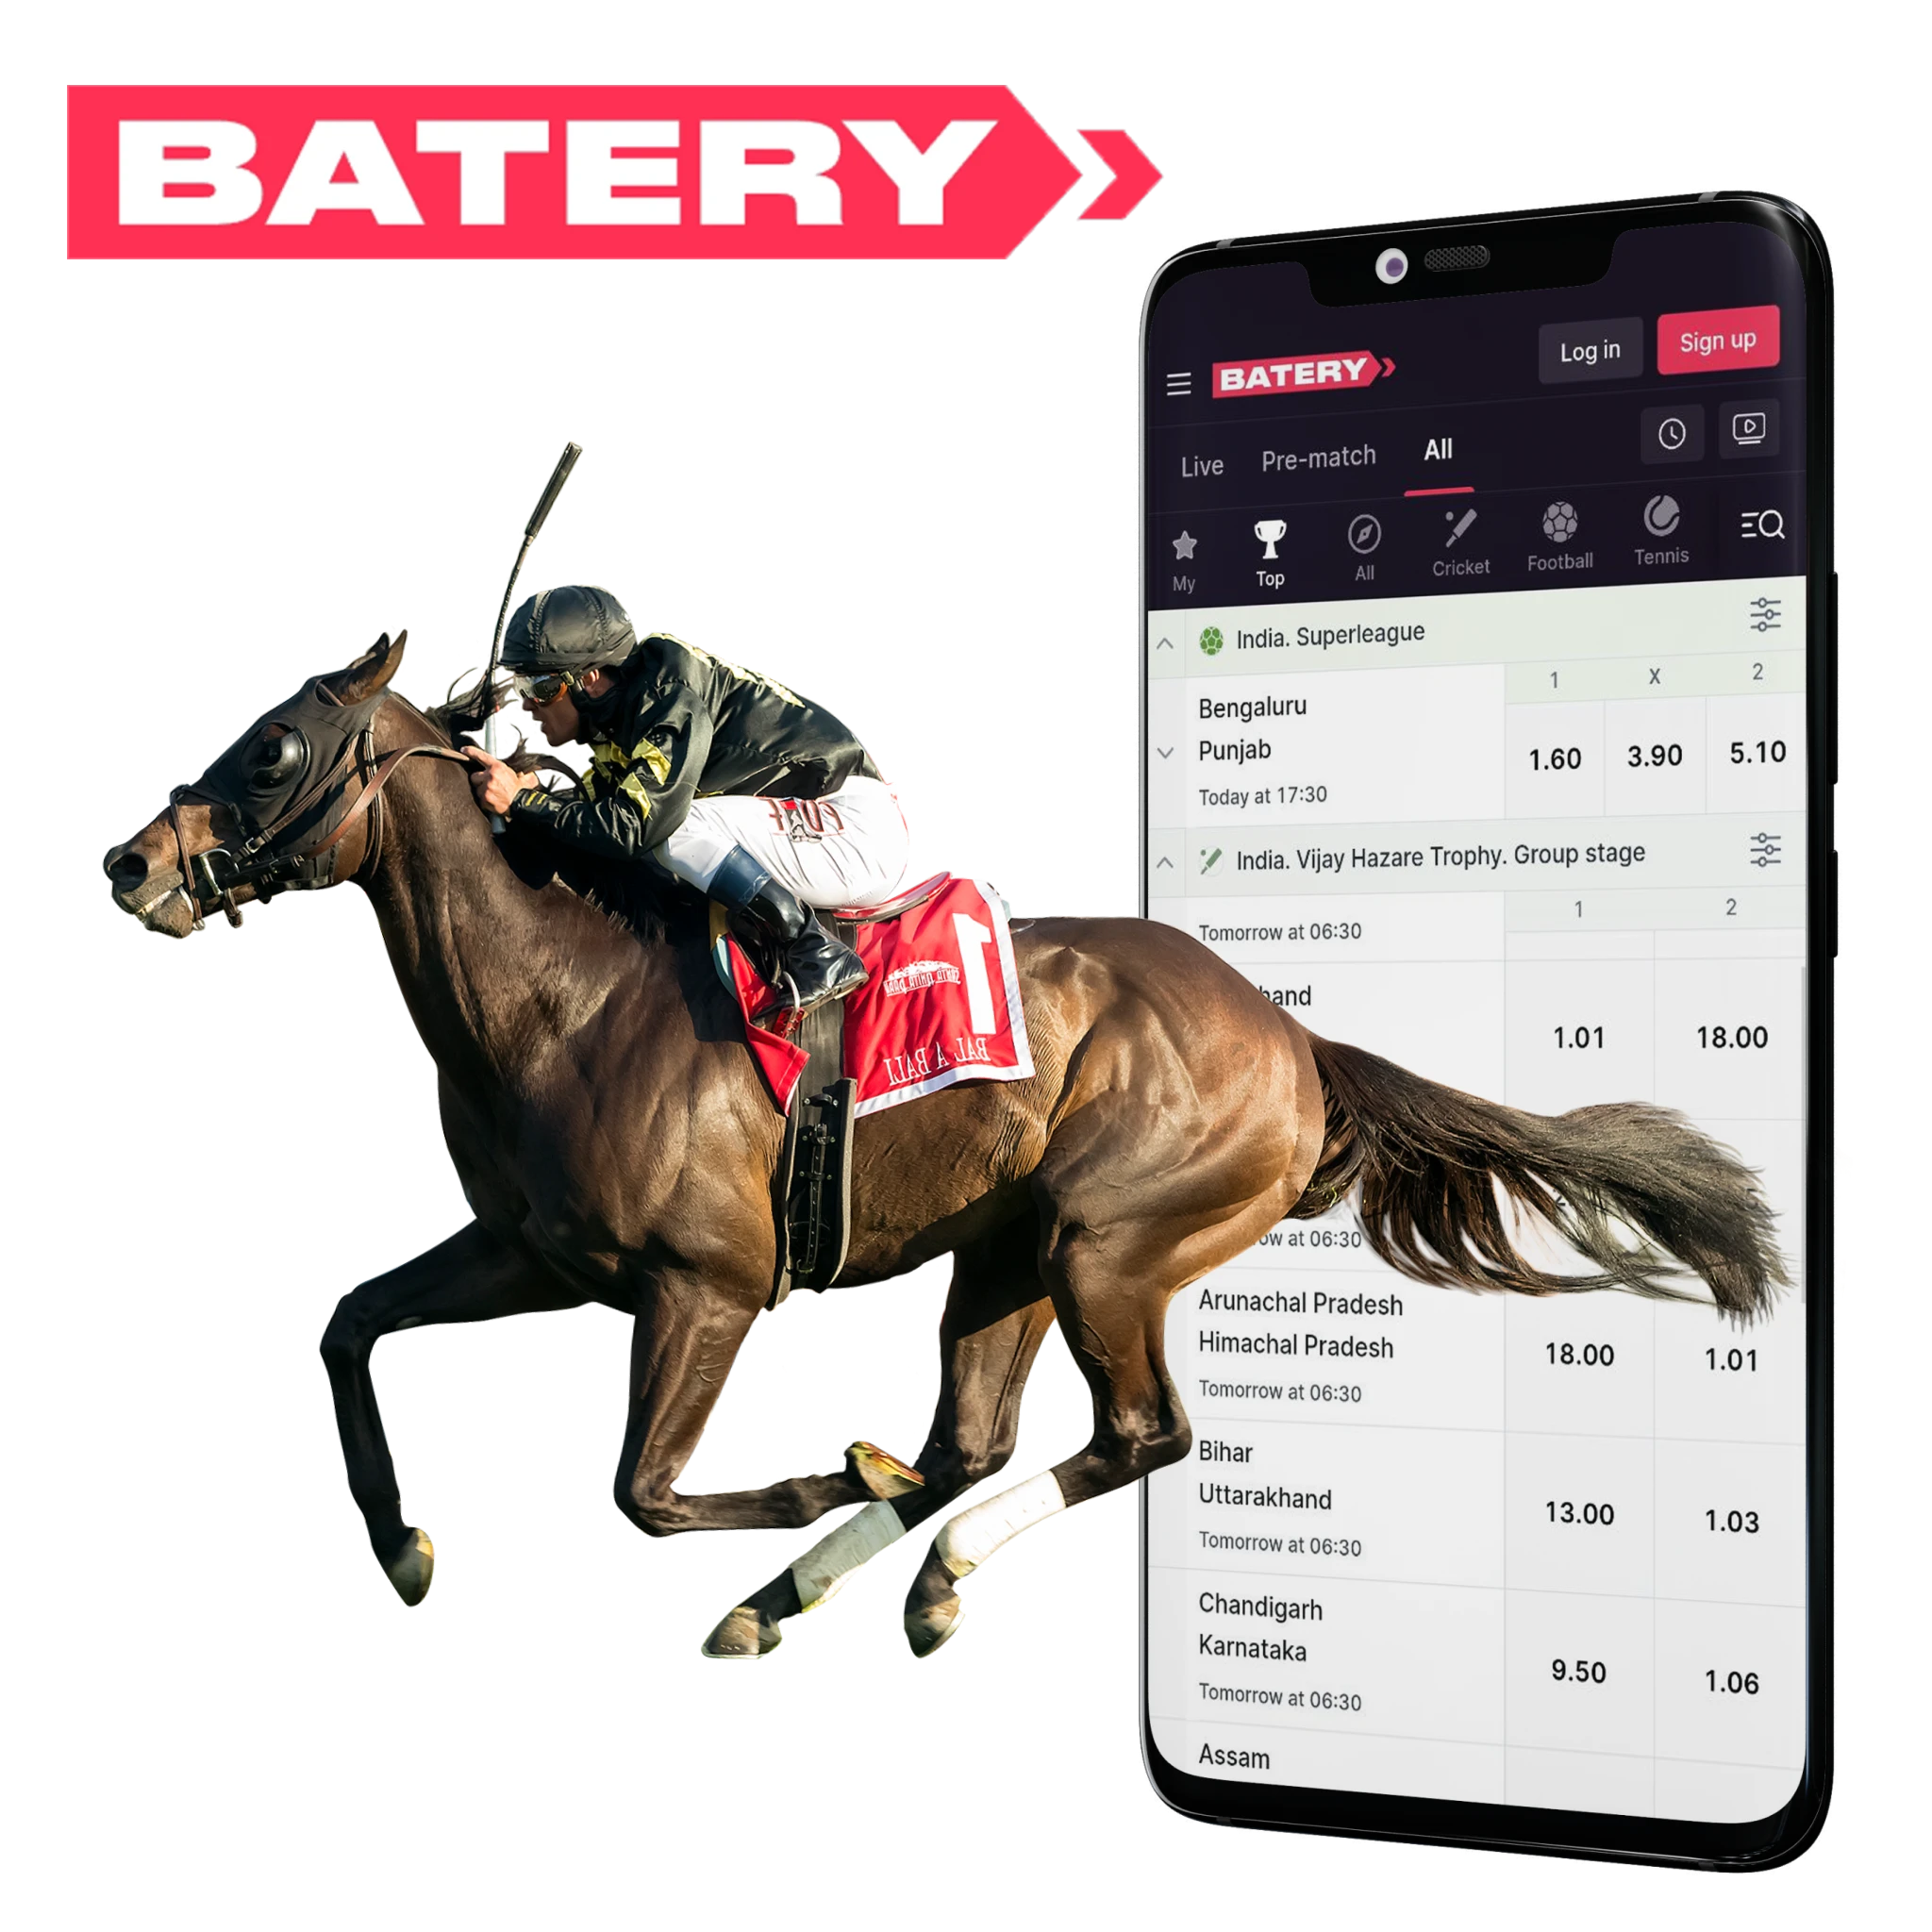 Batery mobile app offers a lot of horse racing events to bet on.